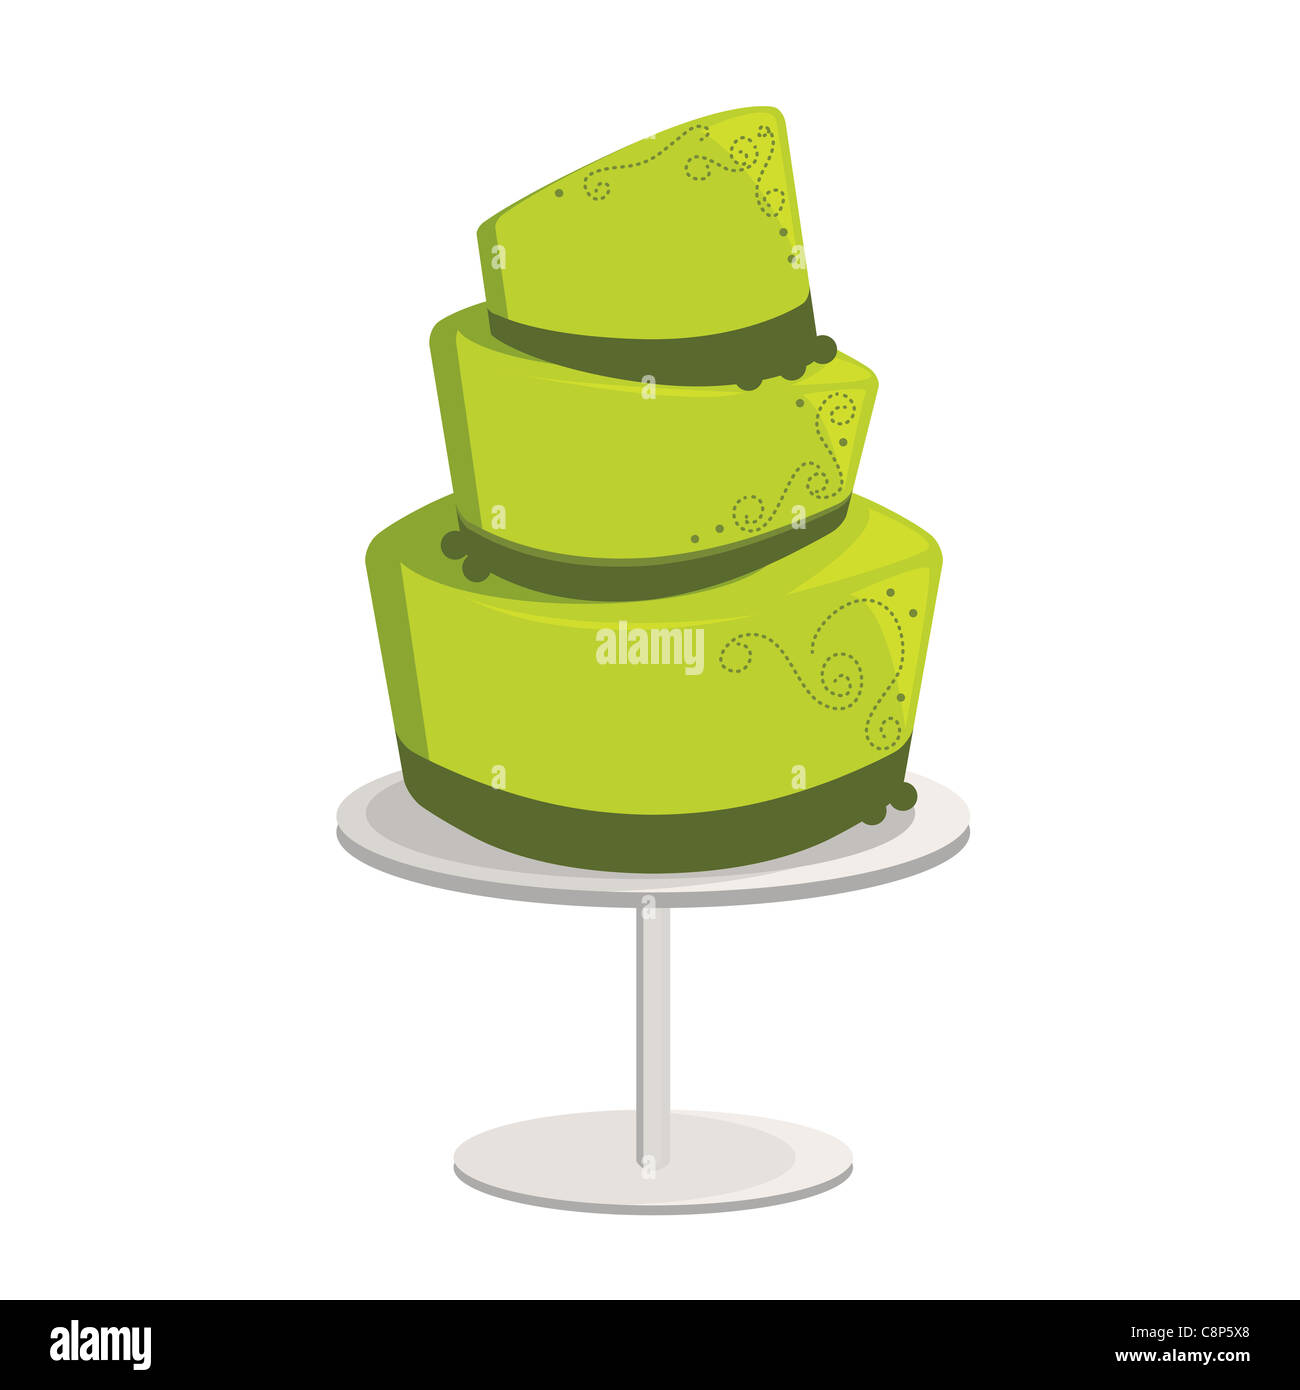 Green topsy turvy cake with darker green decorations on a cake stand Stock Photo